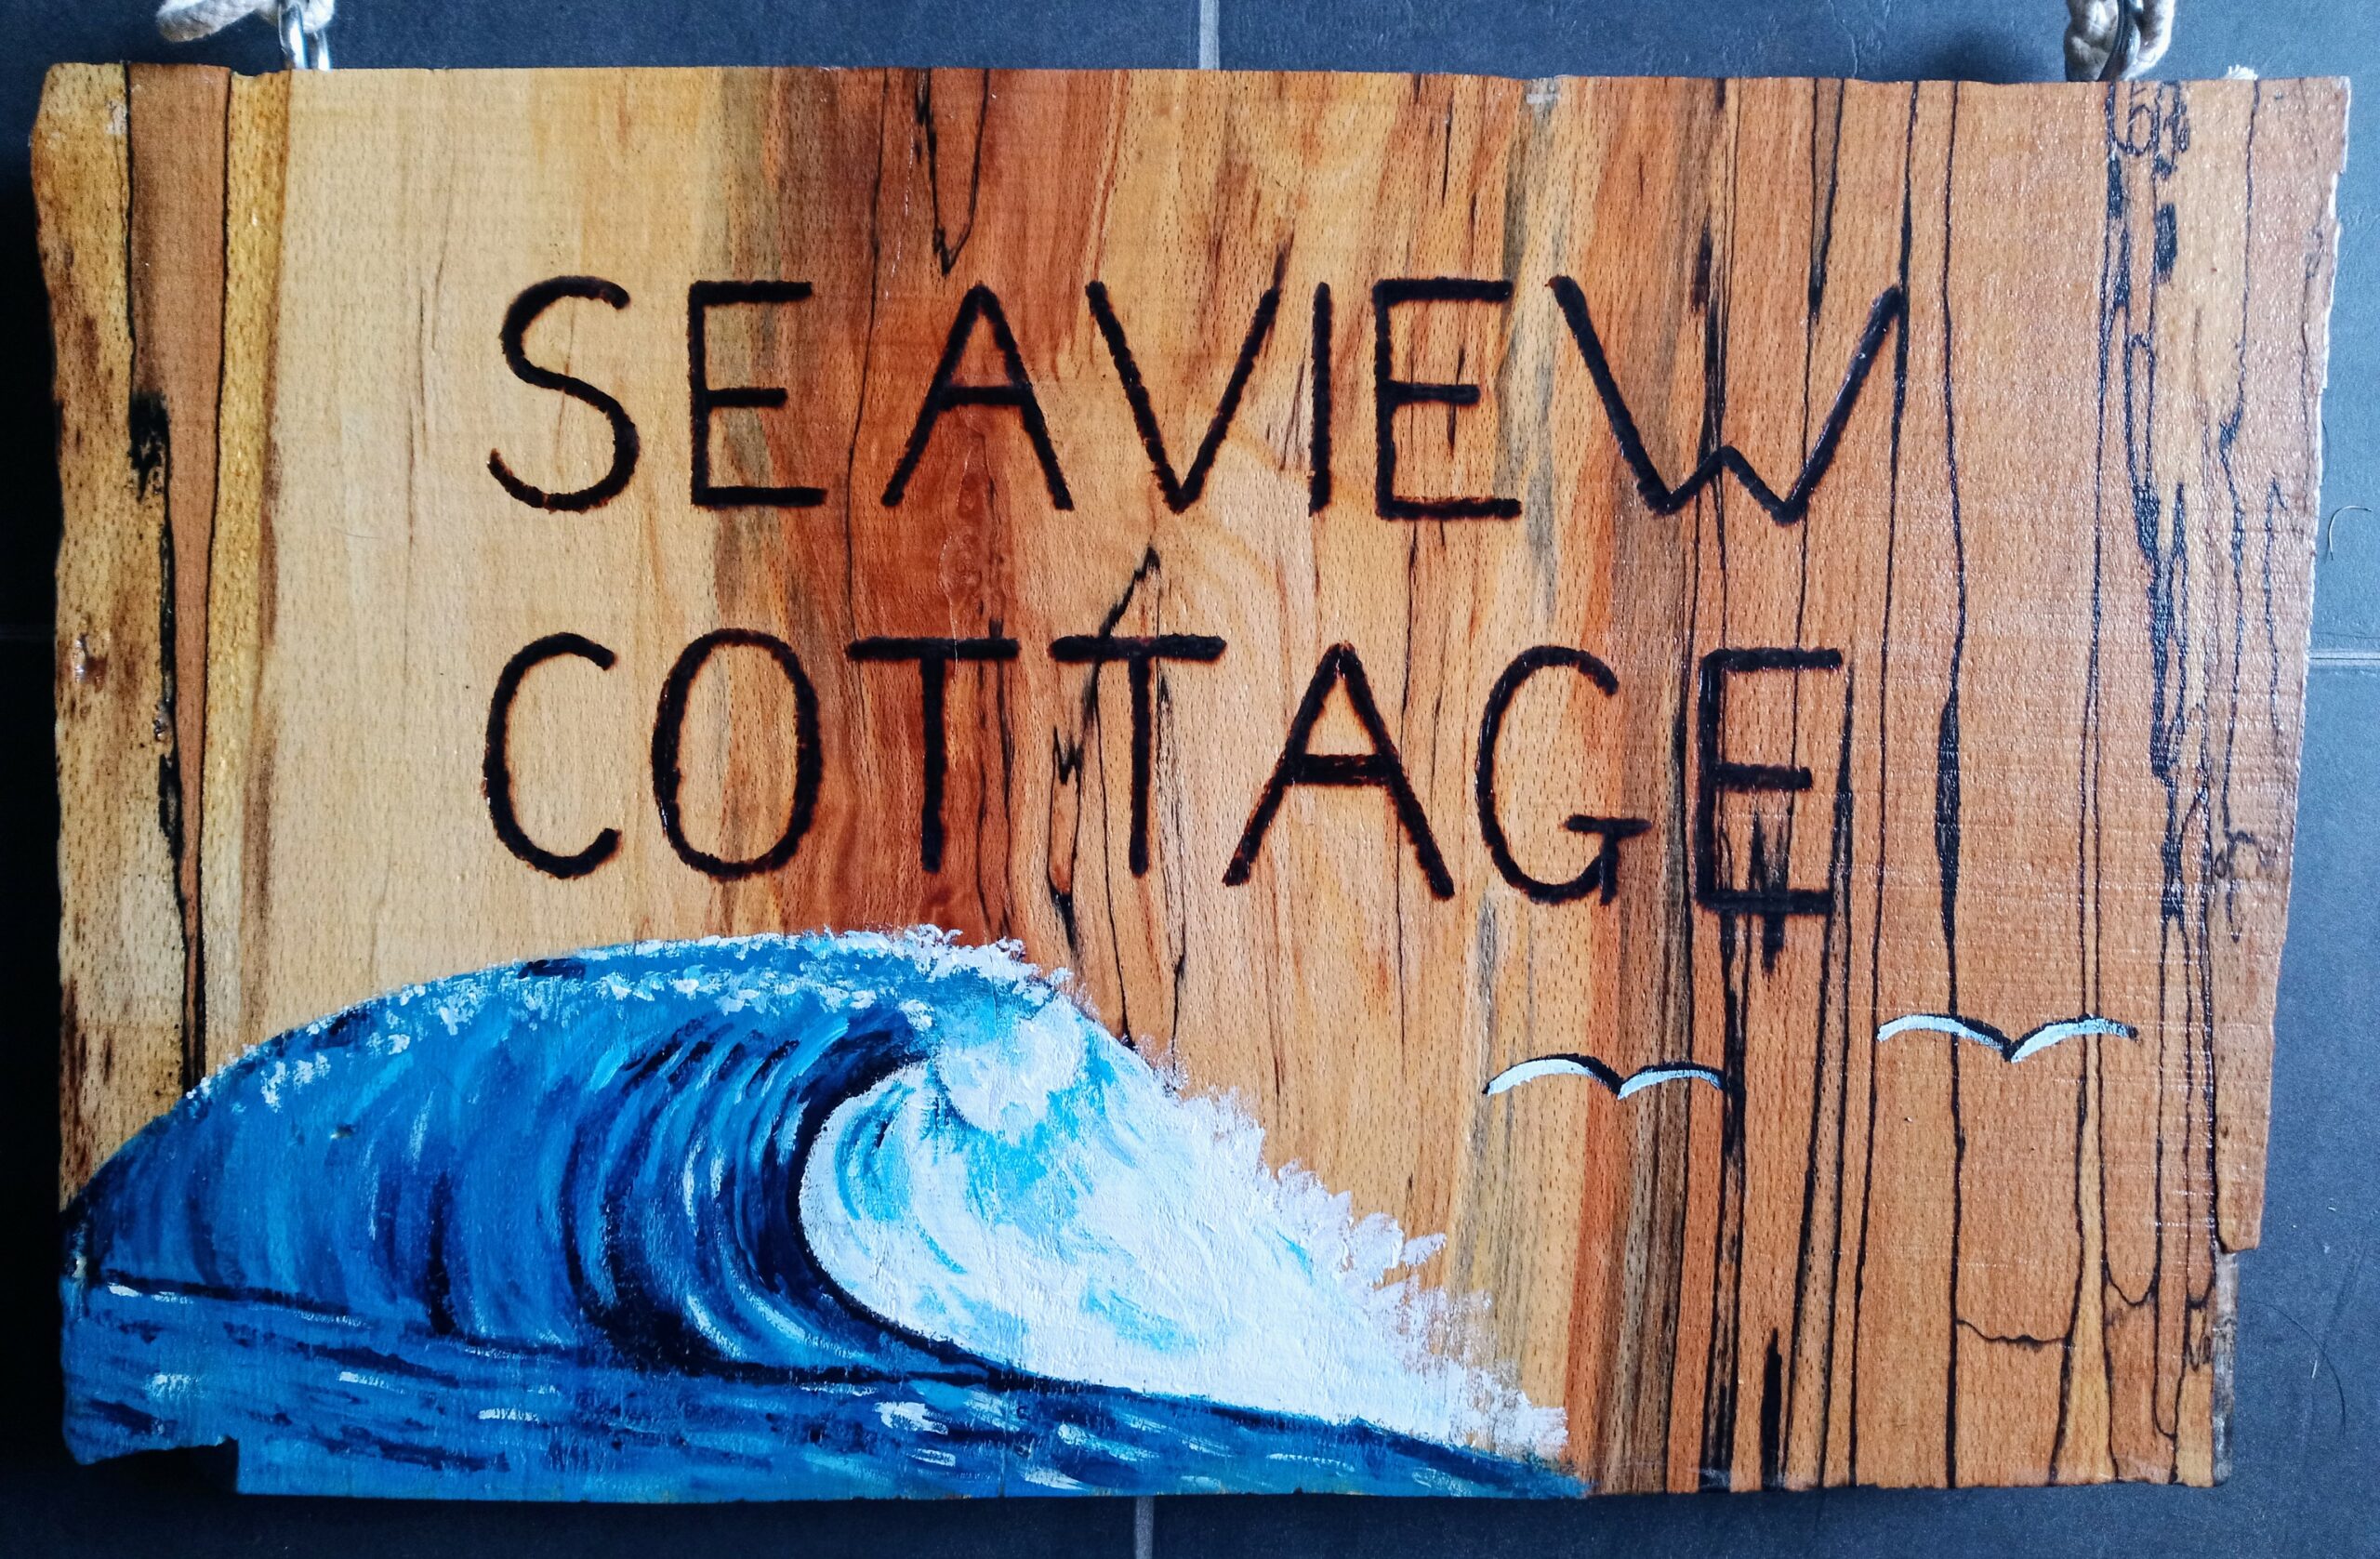 Seaview Cottage double sided house sign